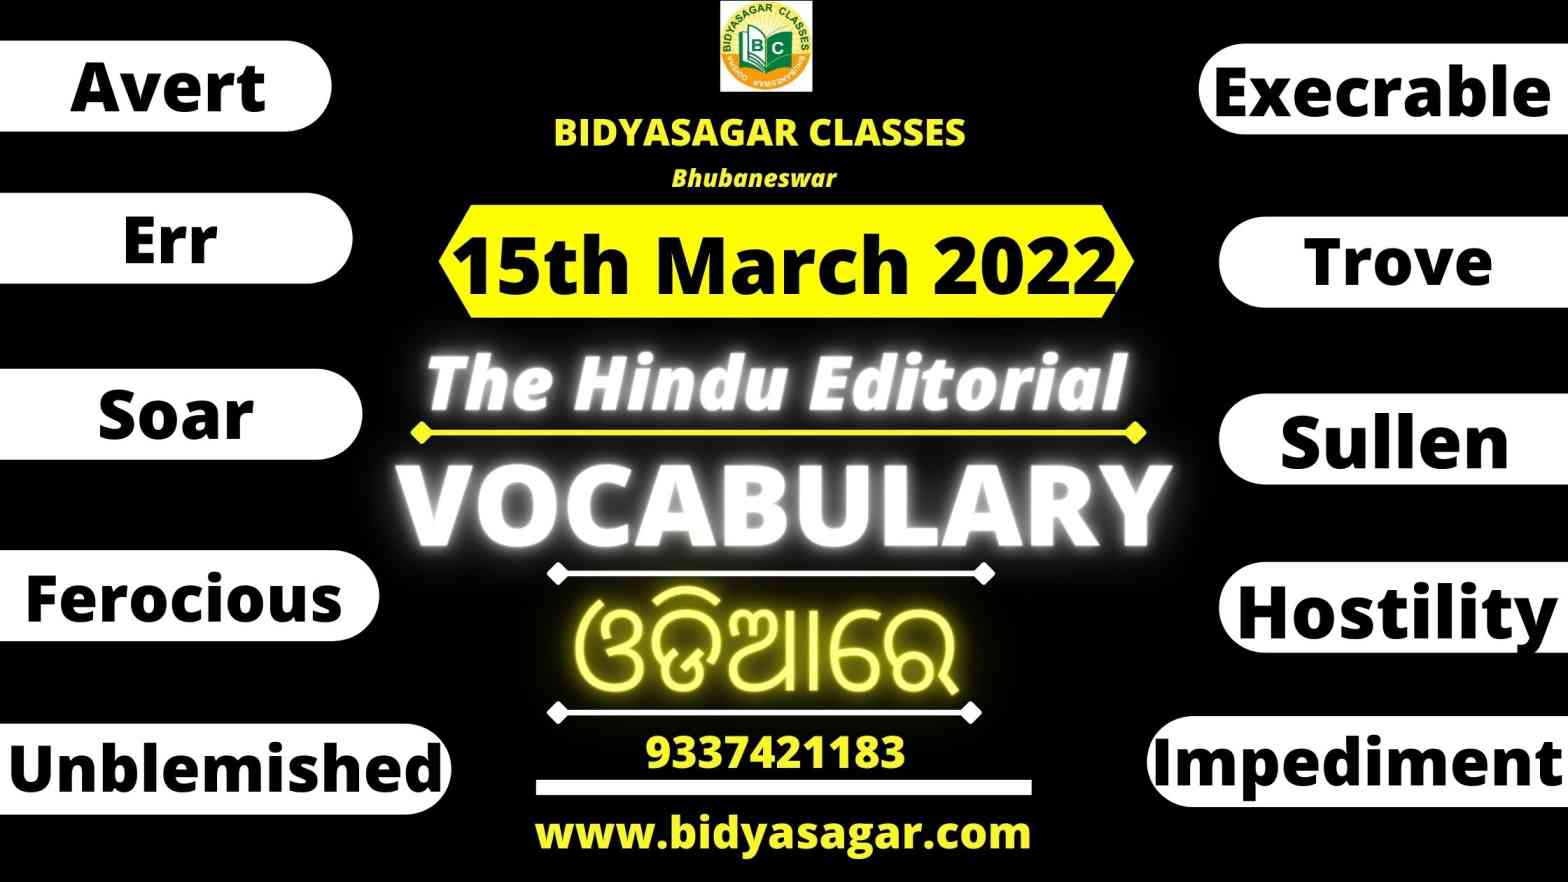 The Hindu Editorial Vocabulary of 15th March 2022